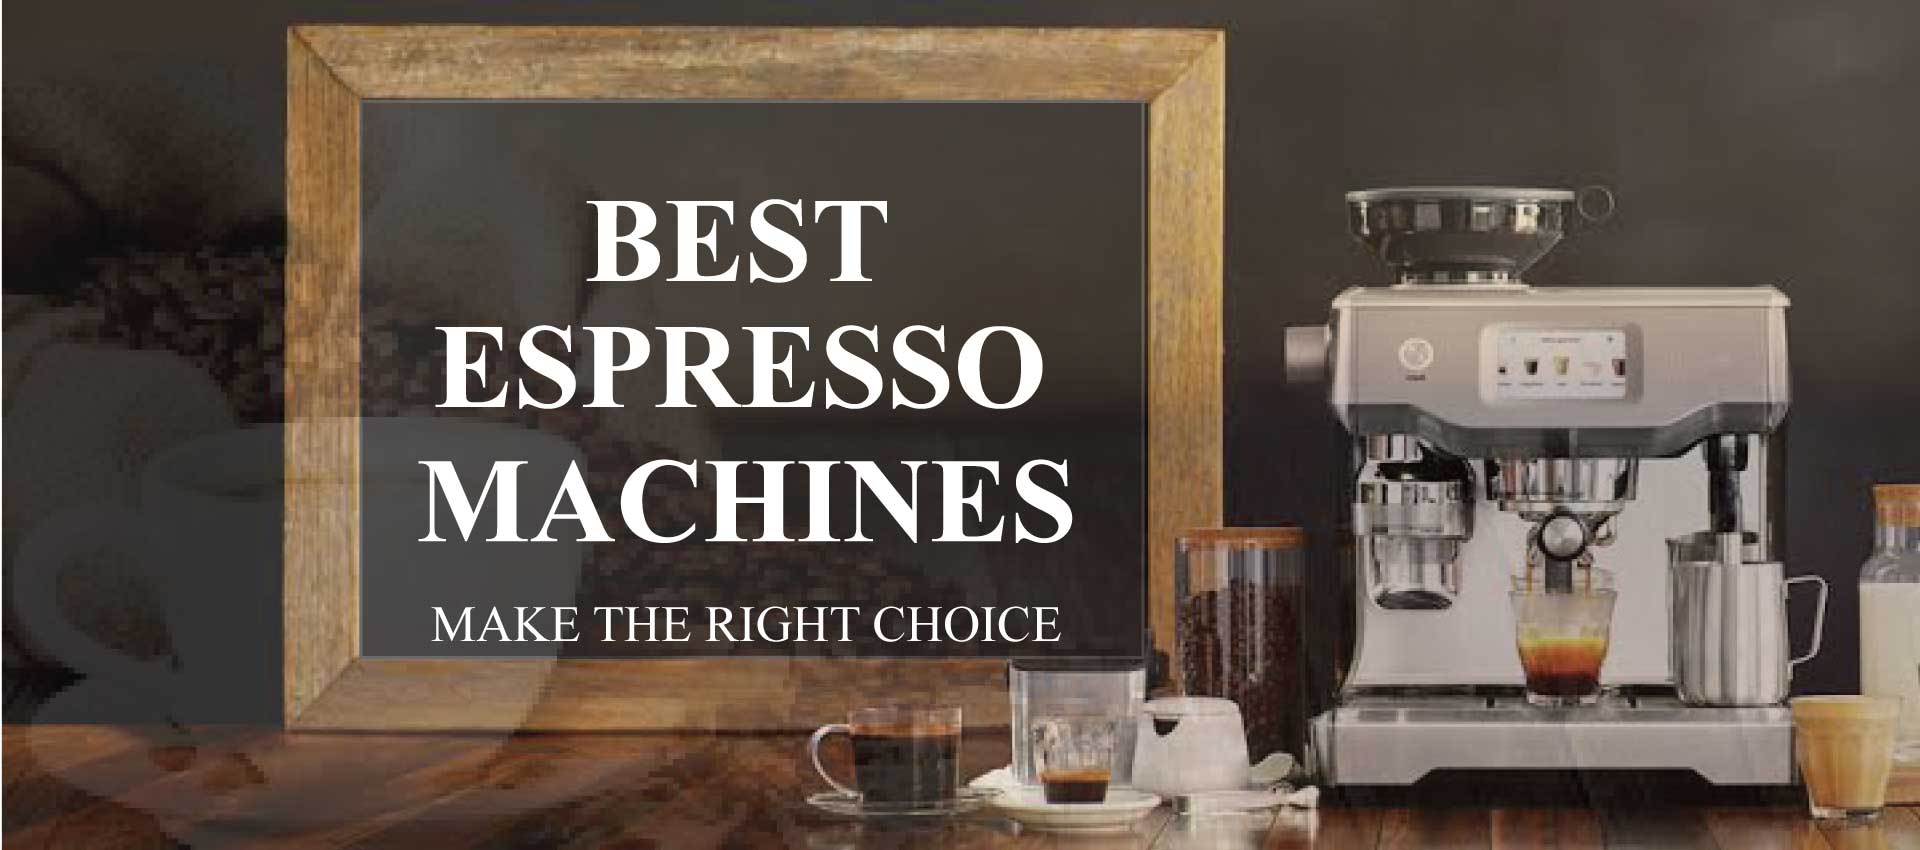 Best Espresso Machine in Pakistan - Types, Features and Availability